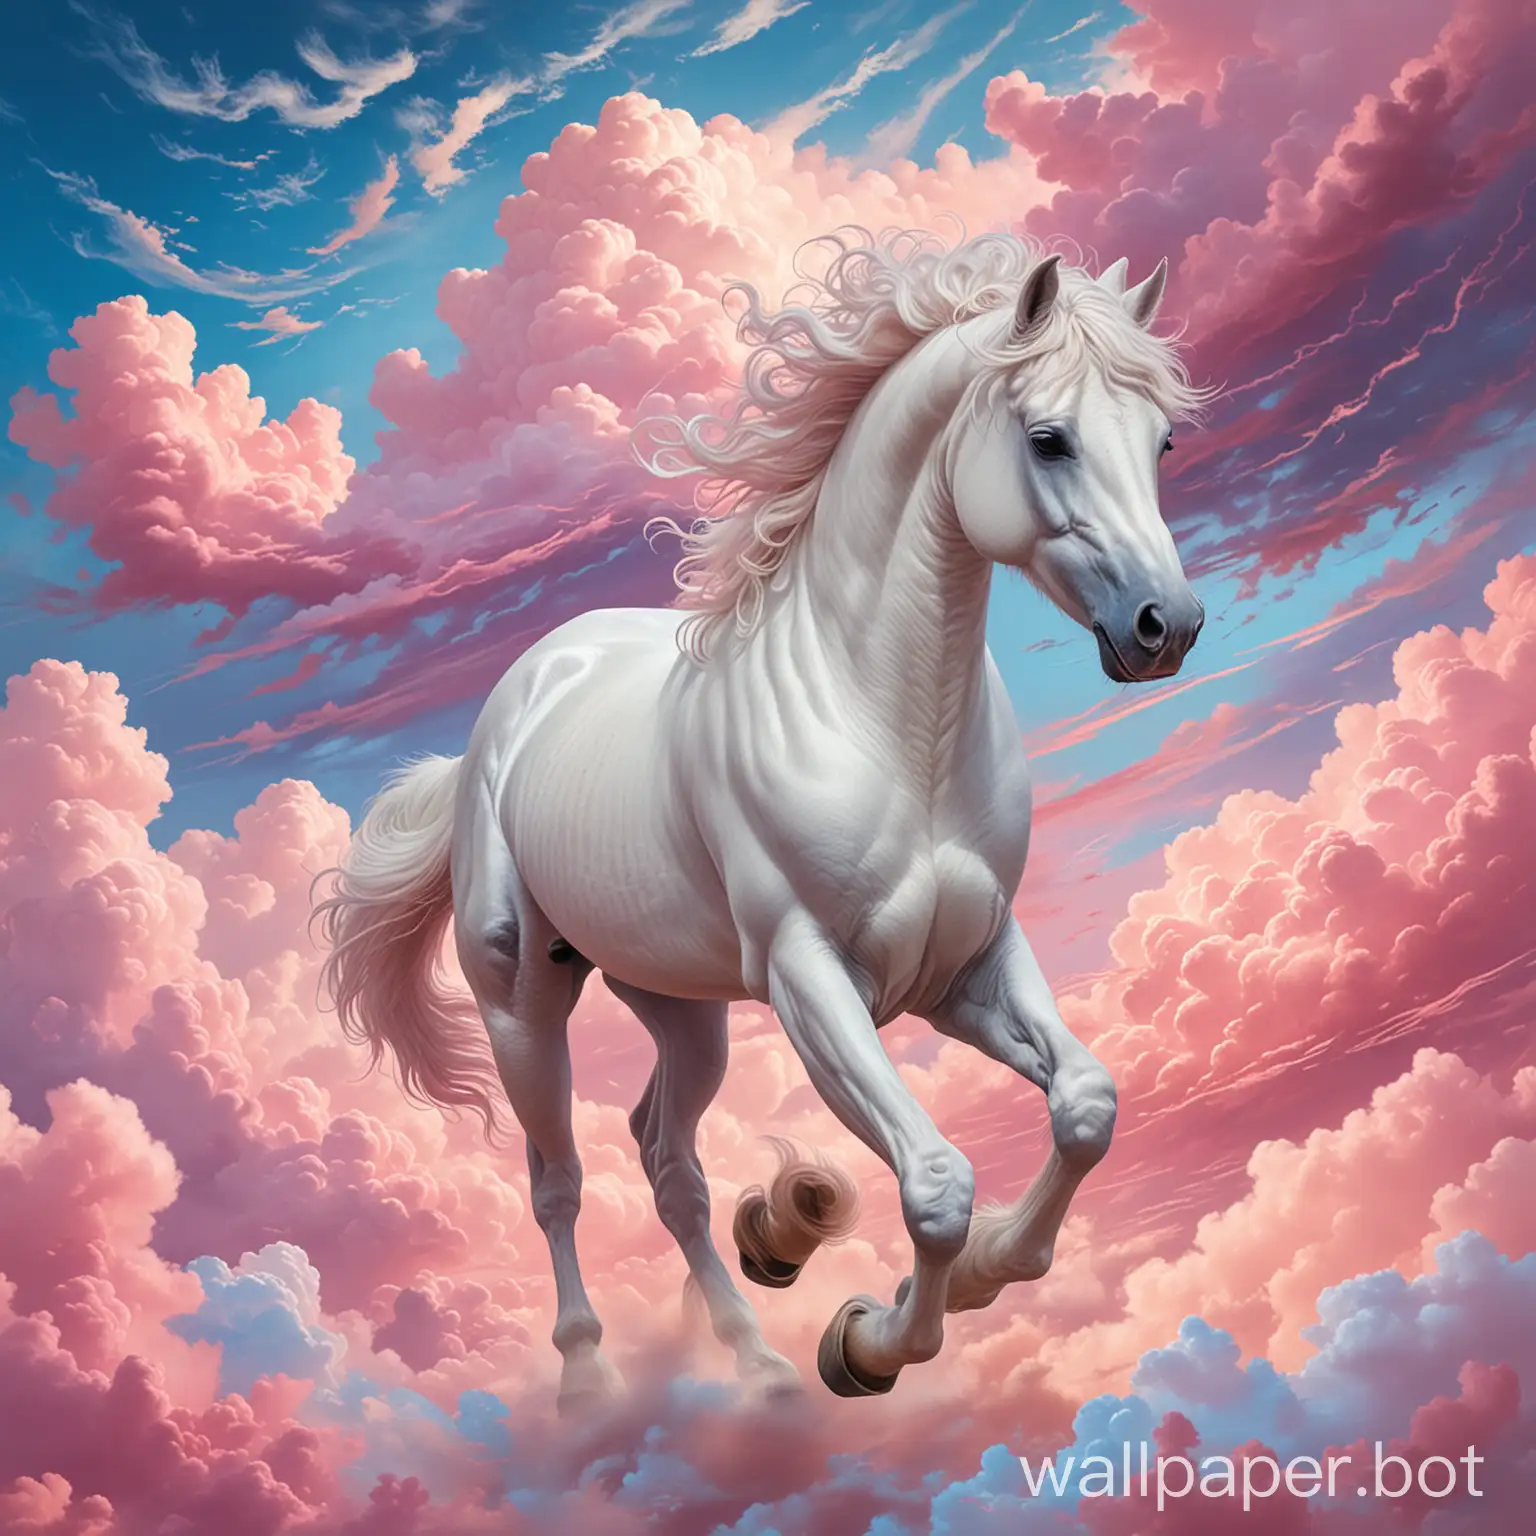 A white horse with a ruffled mane and a cloudy sky is trotting on pink and blue clouds in an emotional space